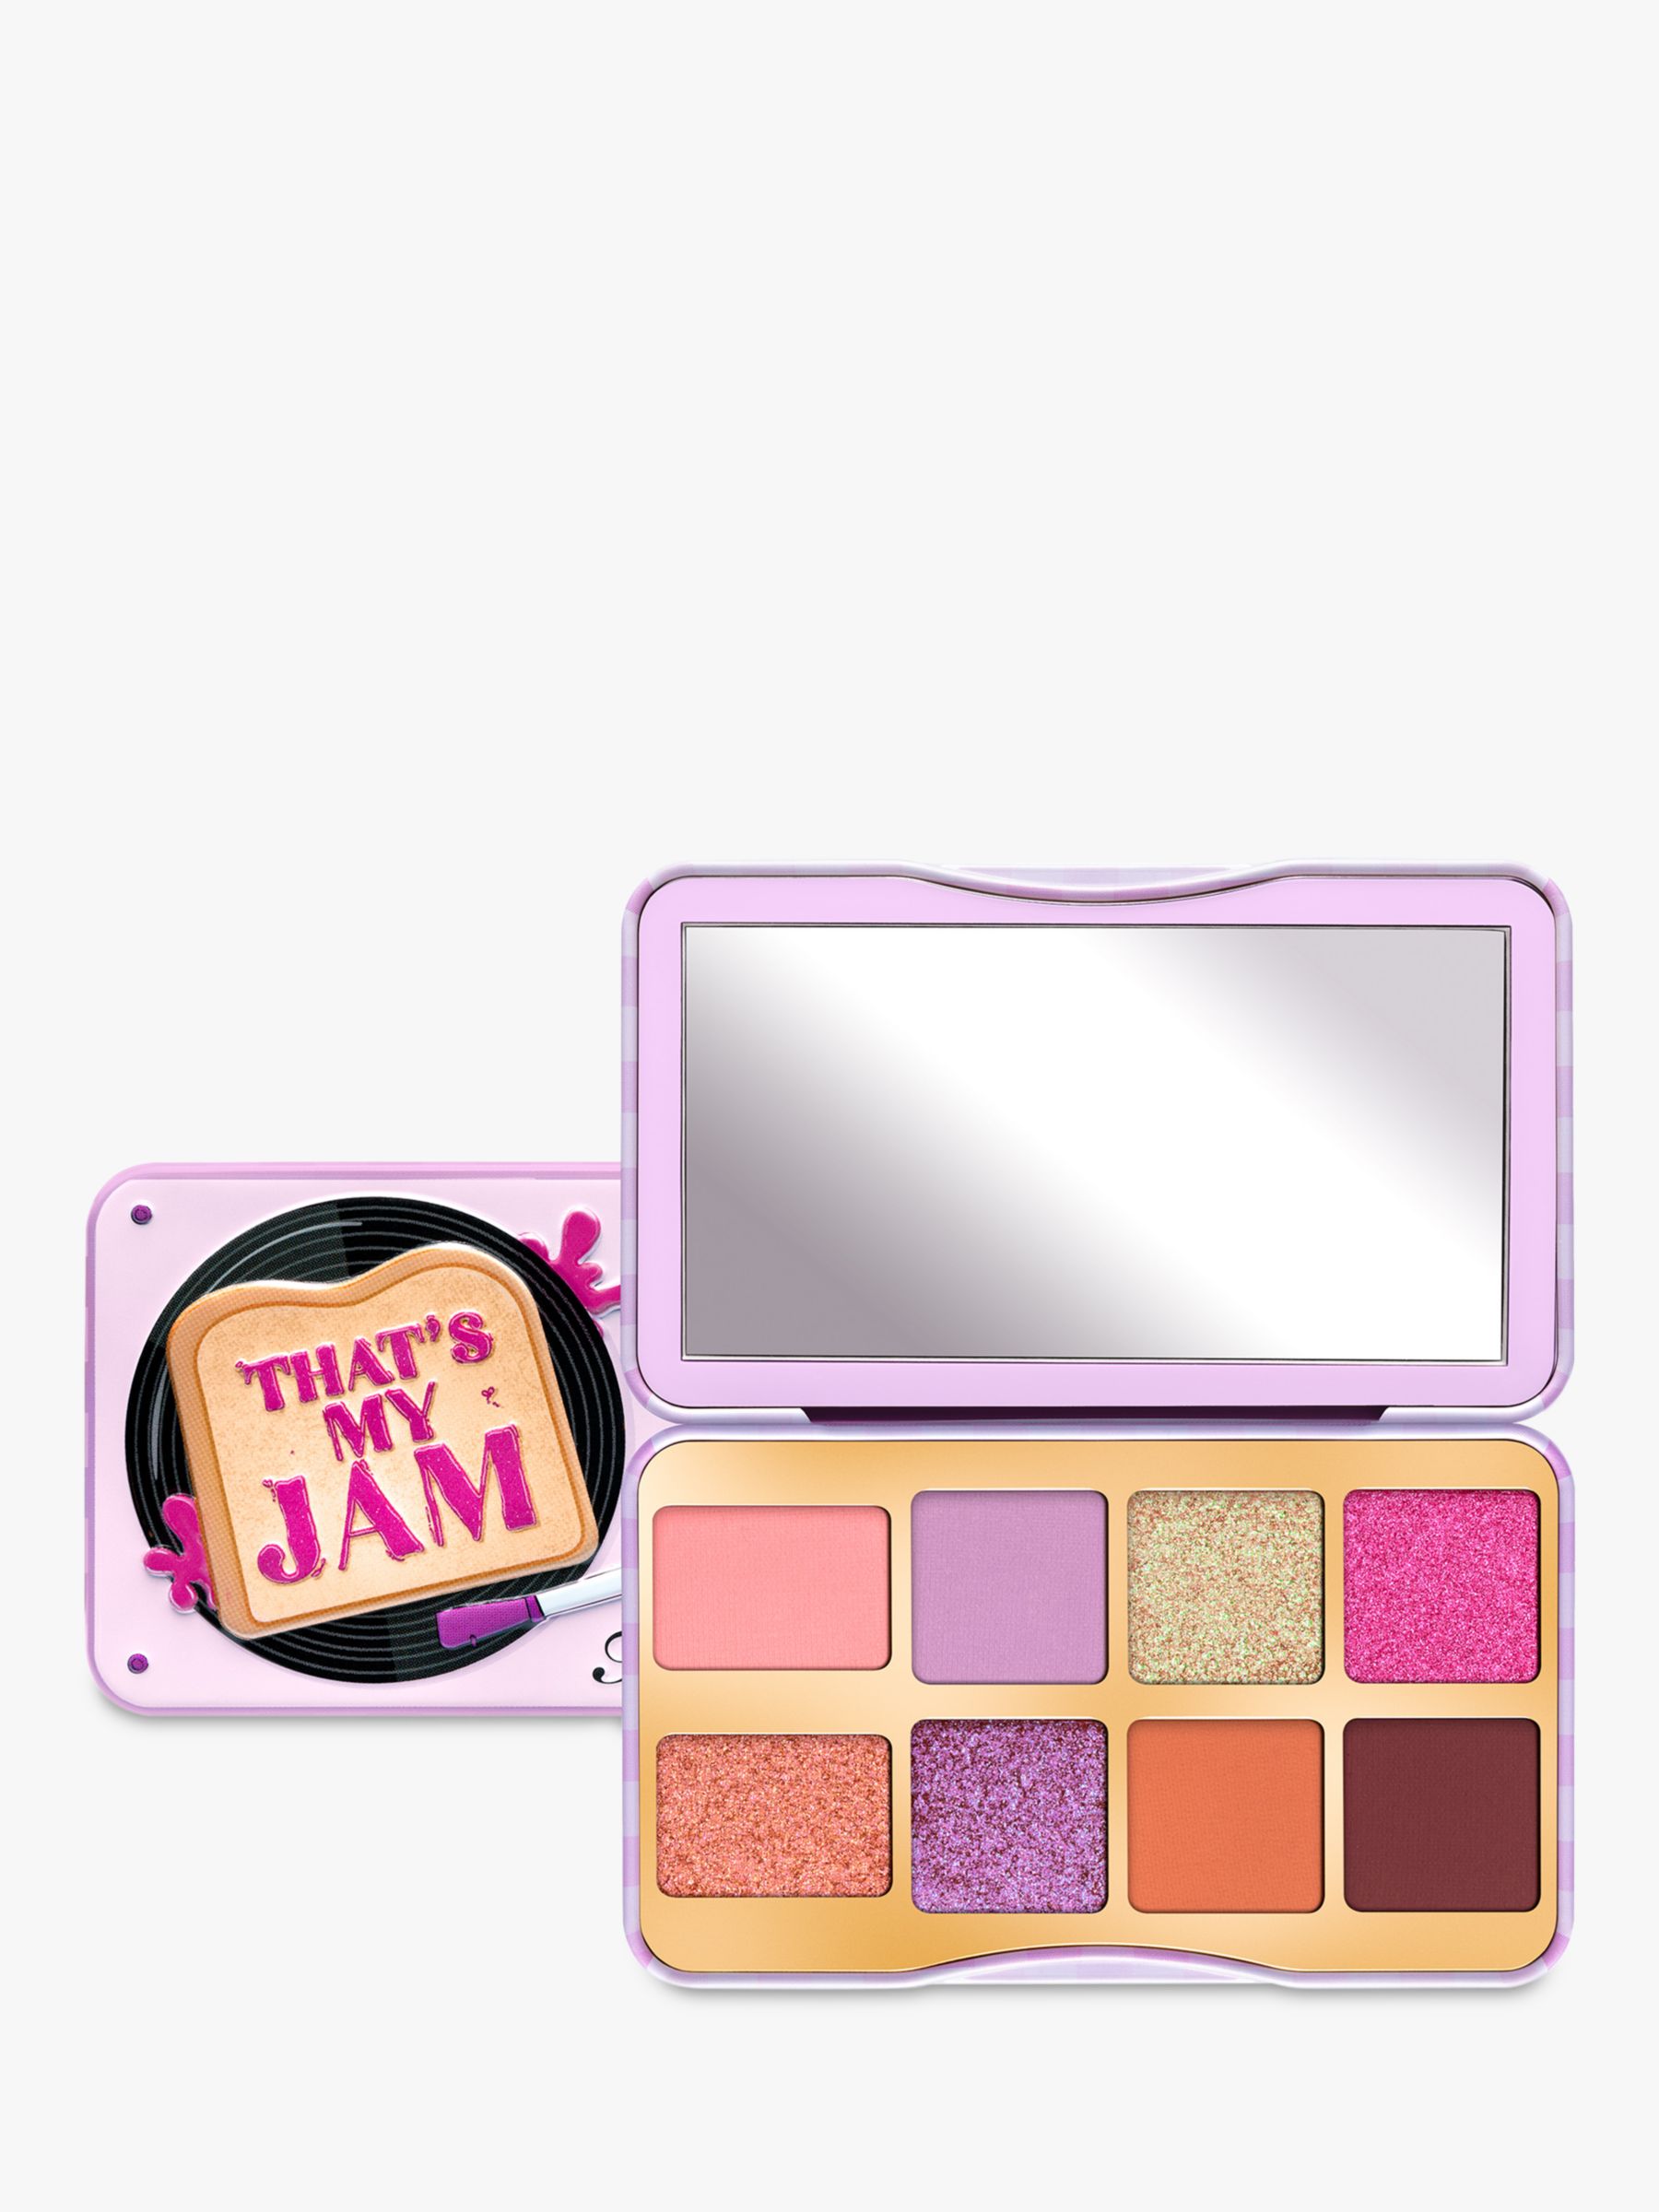 Too Faced Doll Sized Eyeshadow Palette, That's My Jam 1